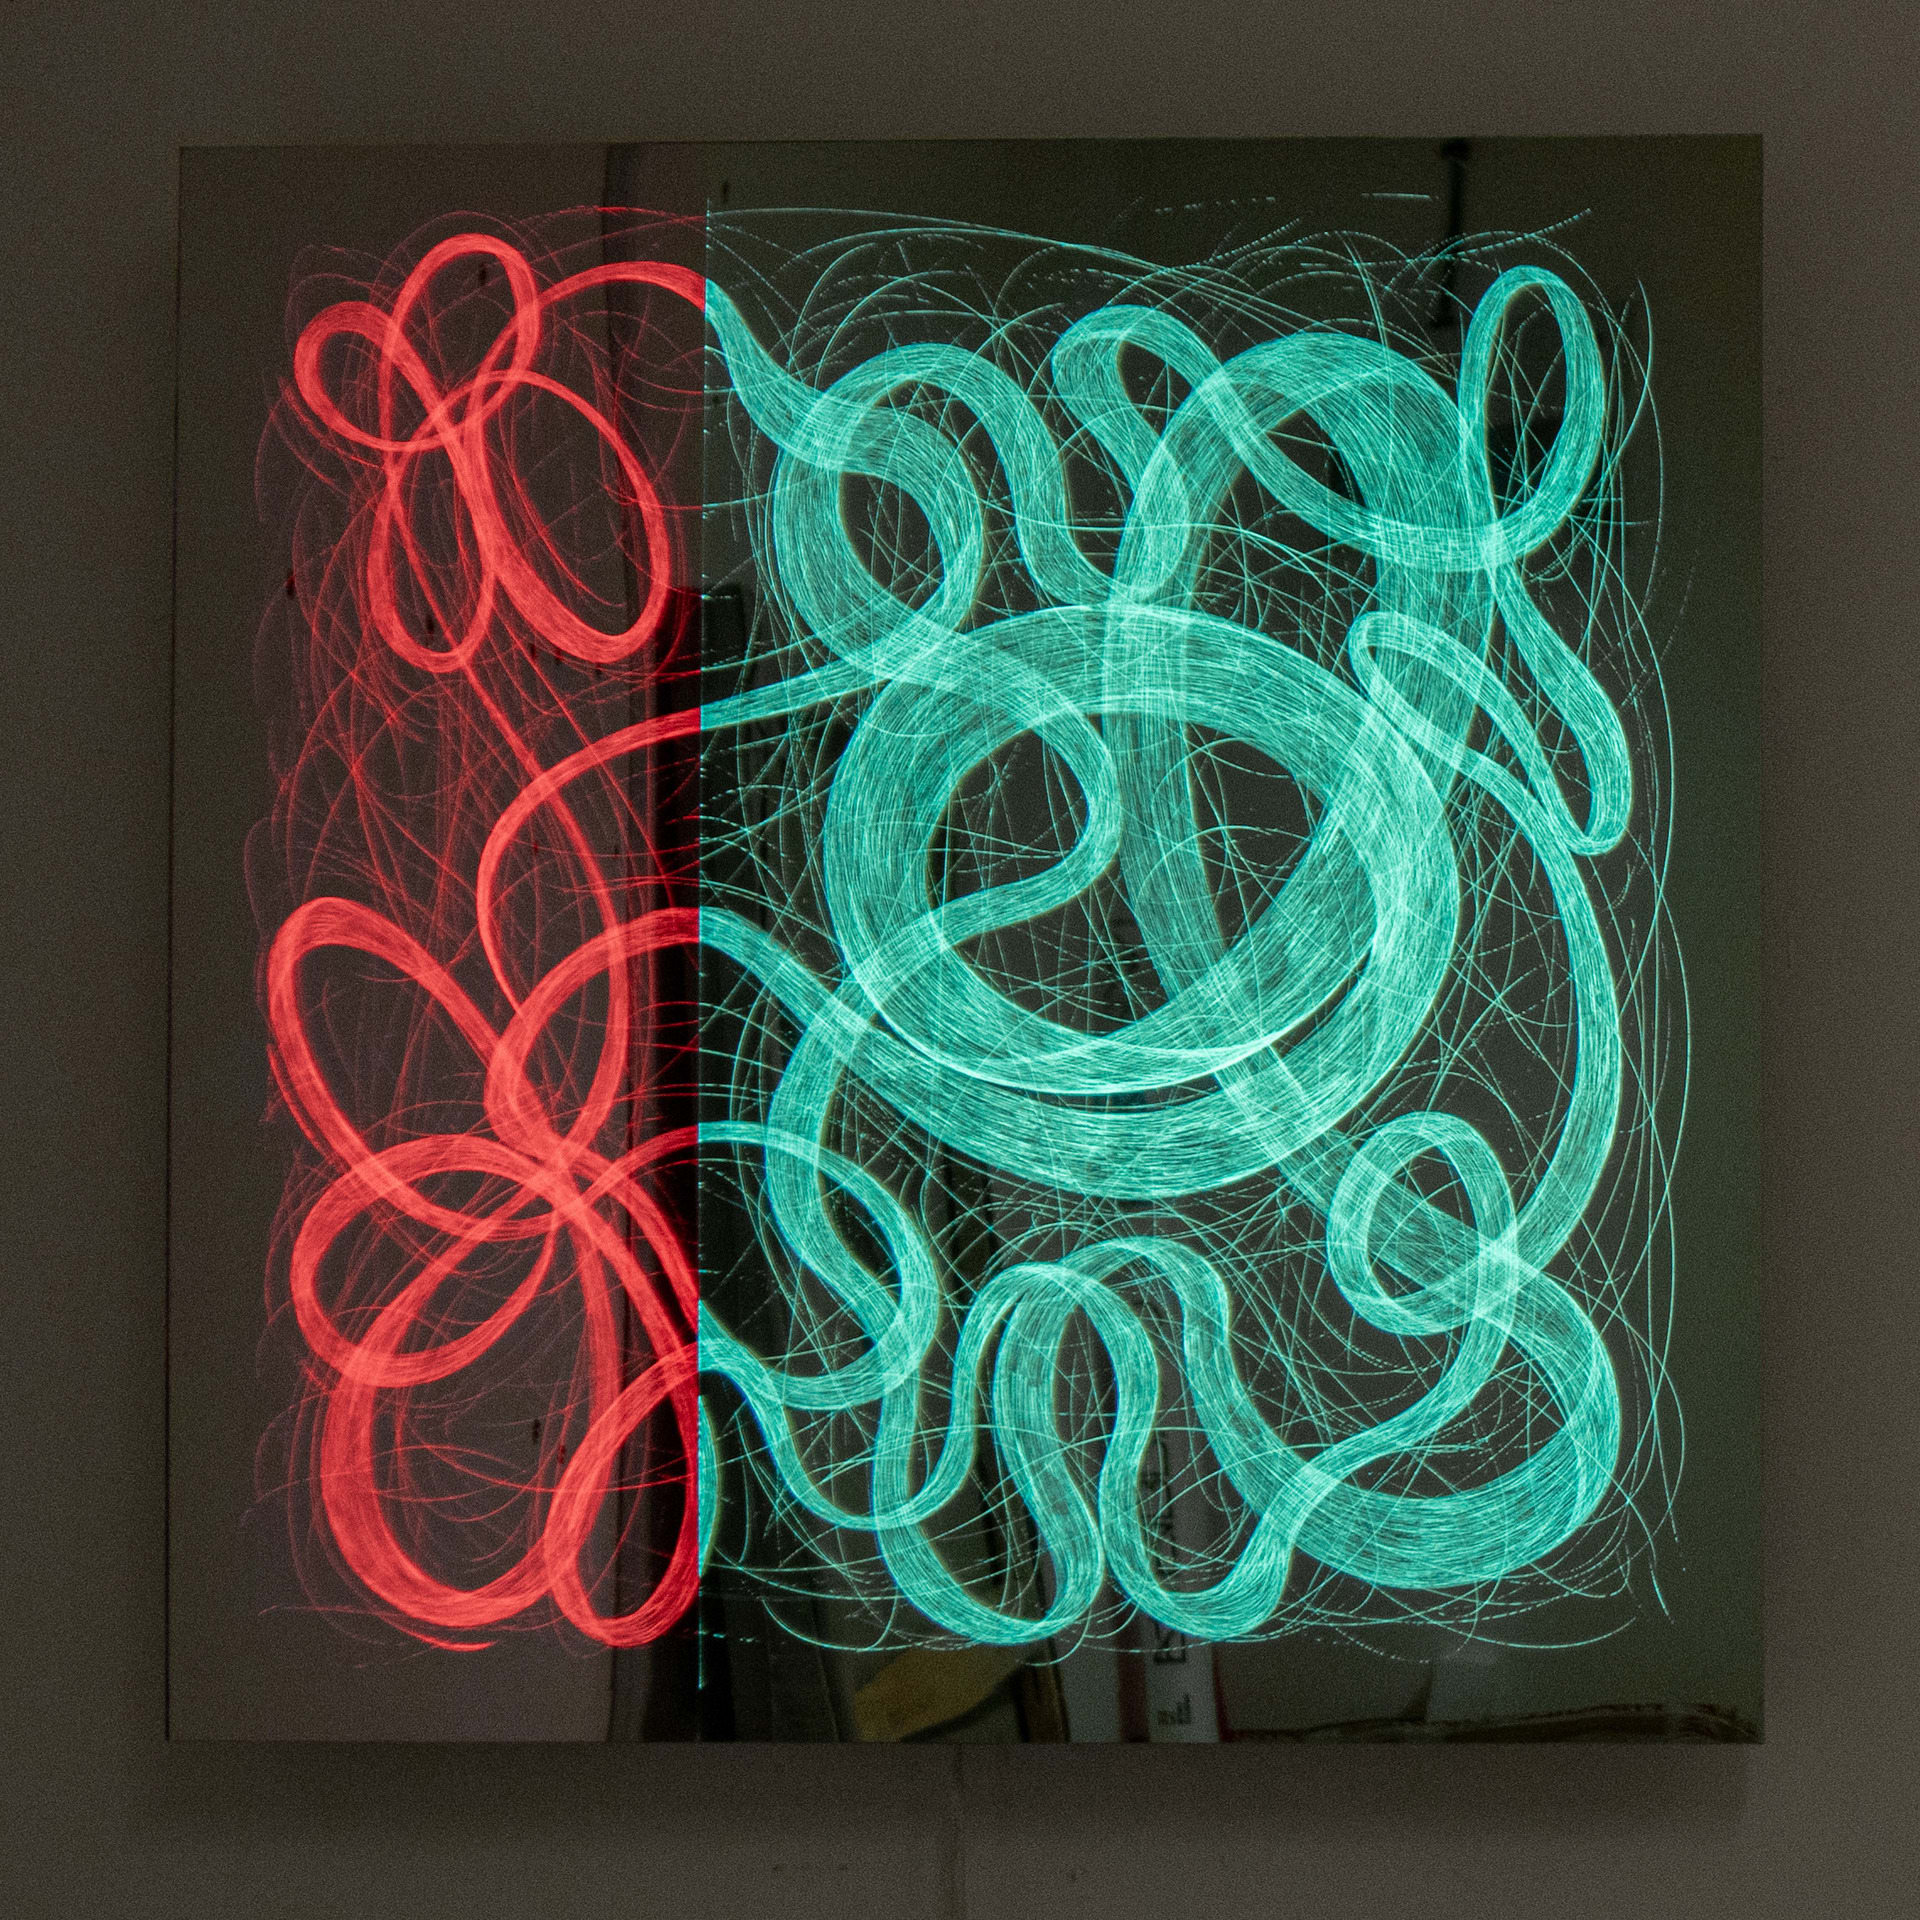 60 x 60 x 7 cm sized two mirrors combining with coloured LED Panel so that scratched part is lightening 